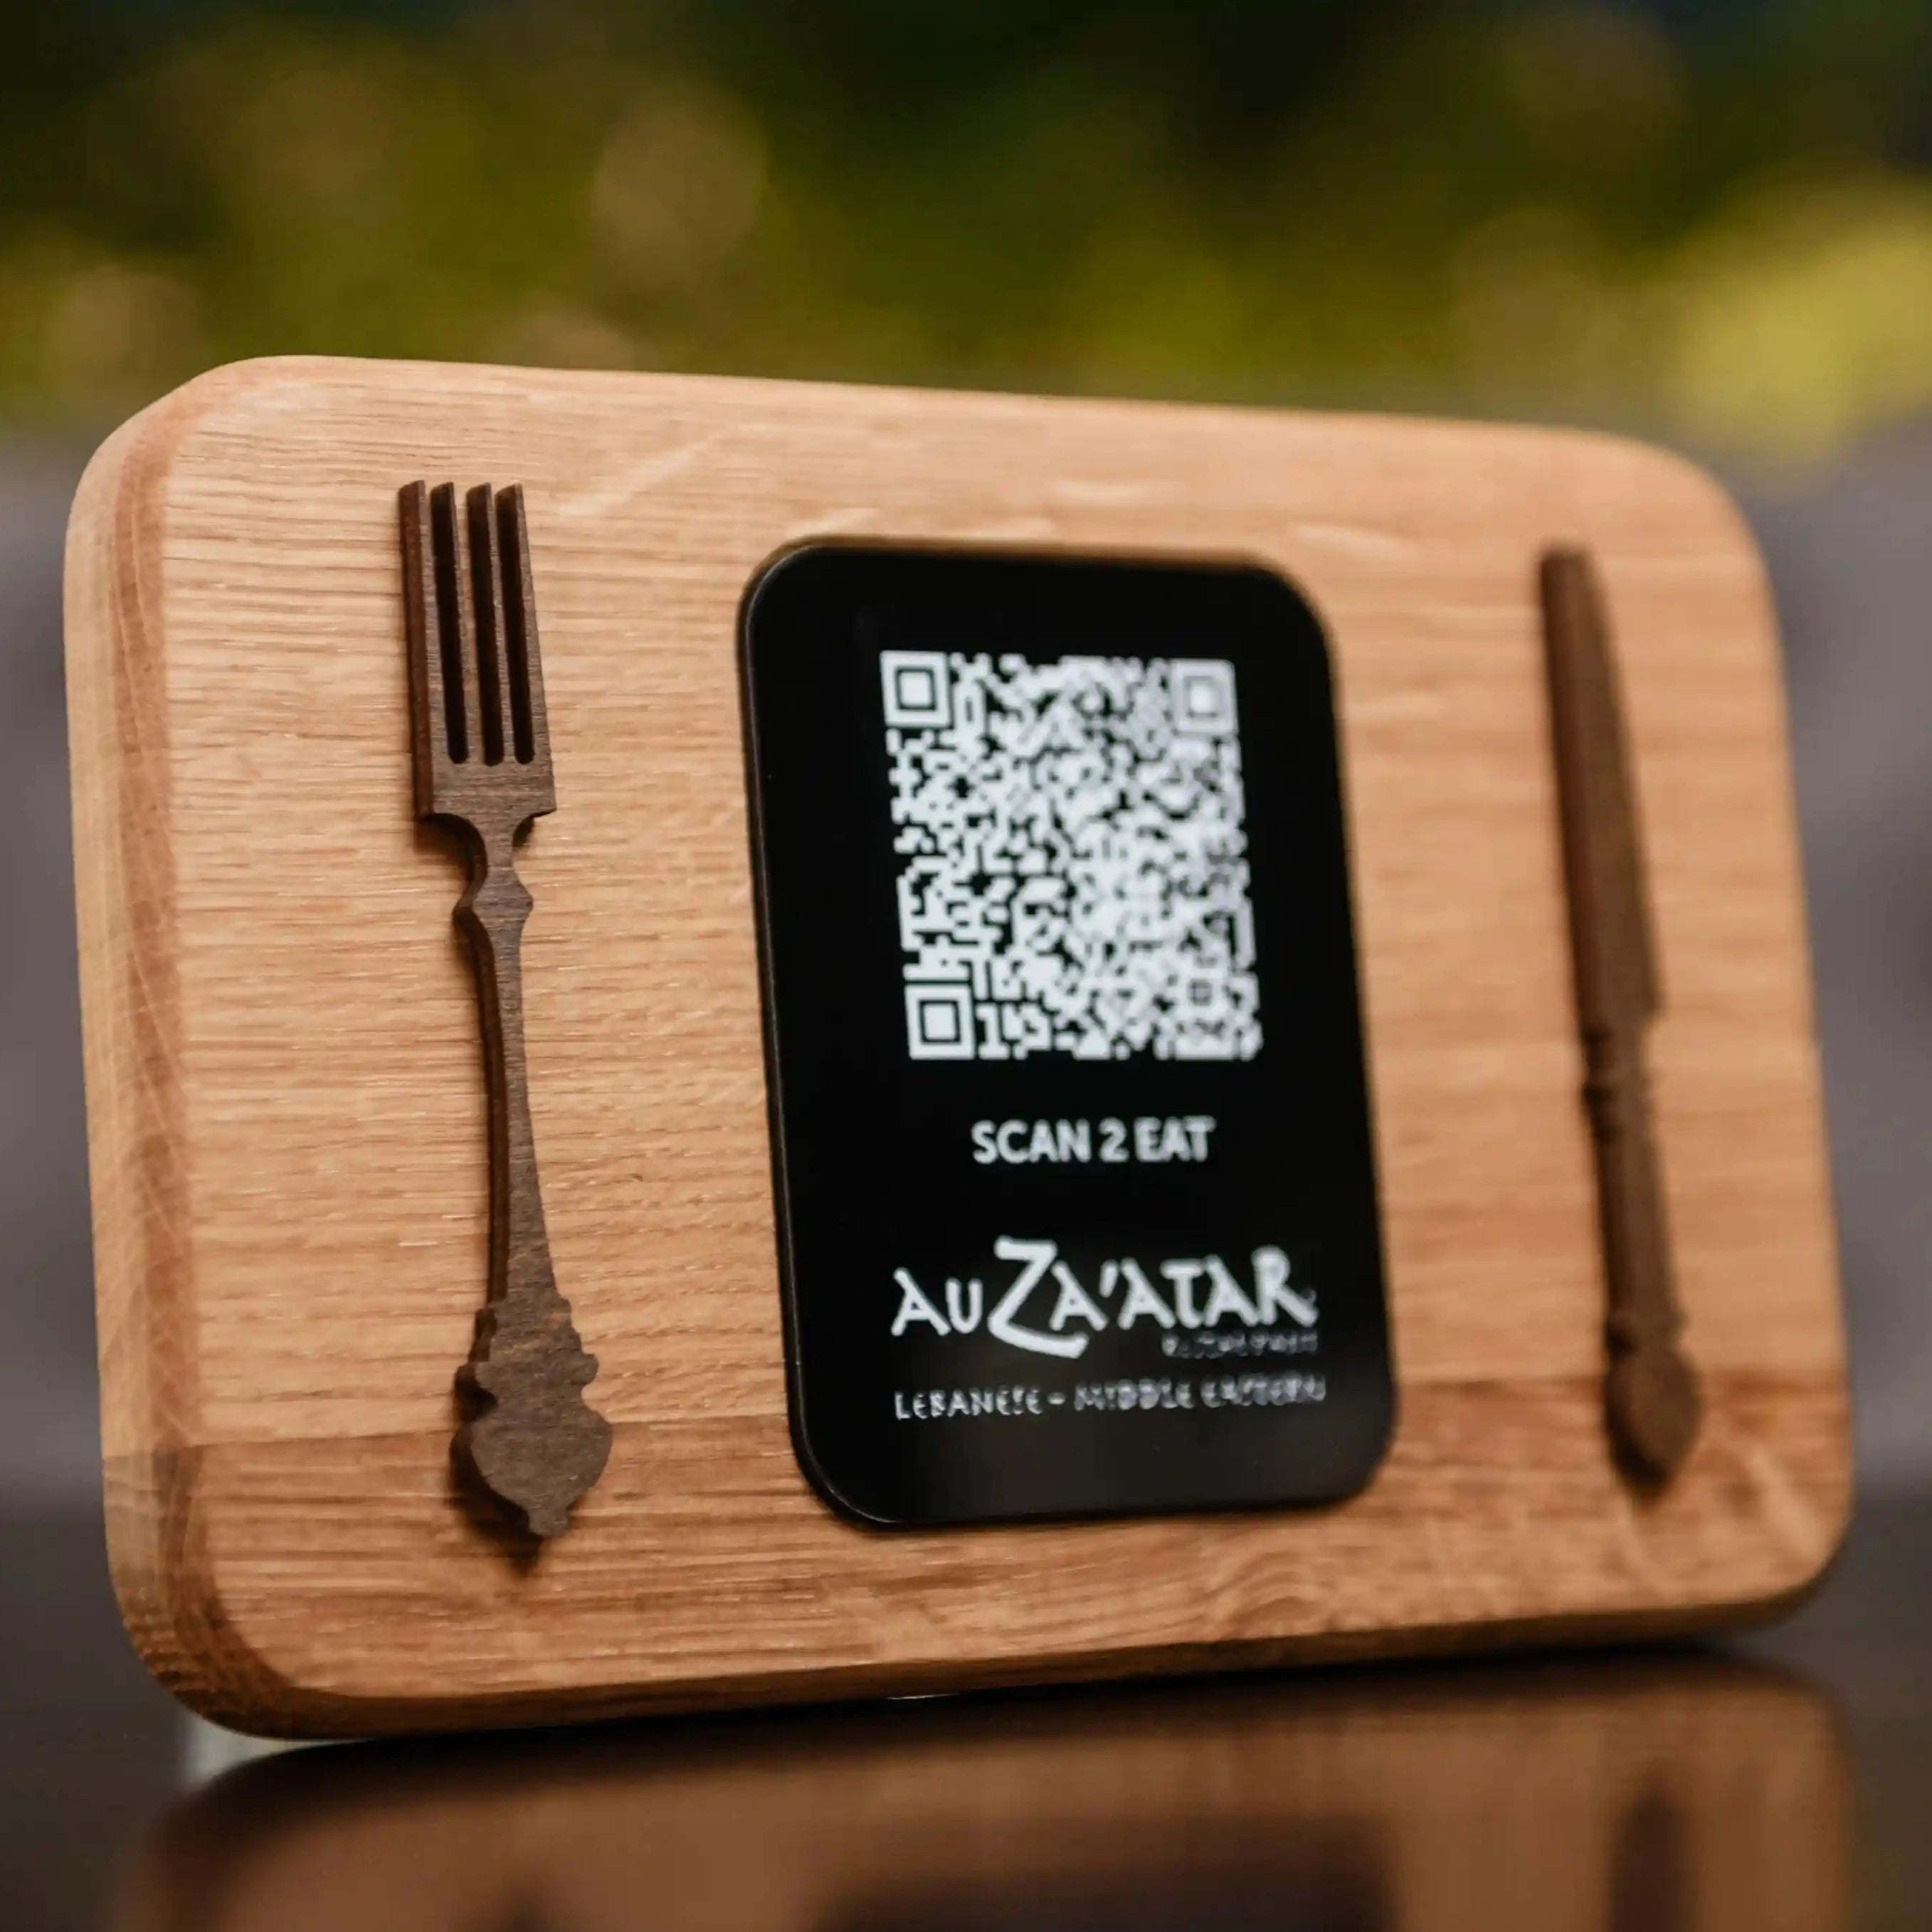 Touchless wooden table menu display featuring a QR code and acrylic sign, perfect for modern dining environments.